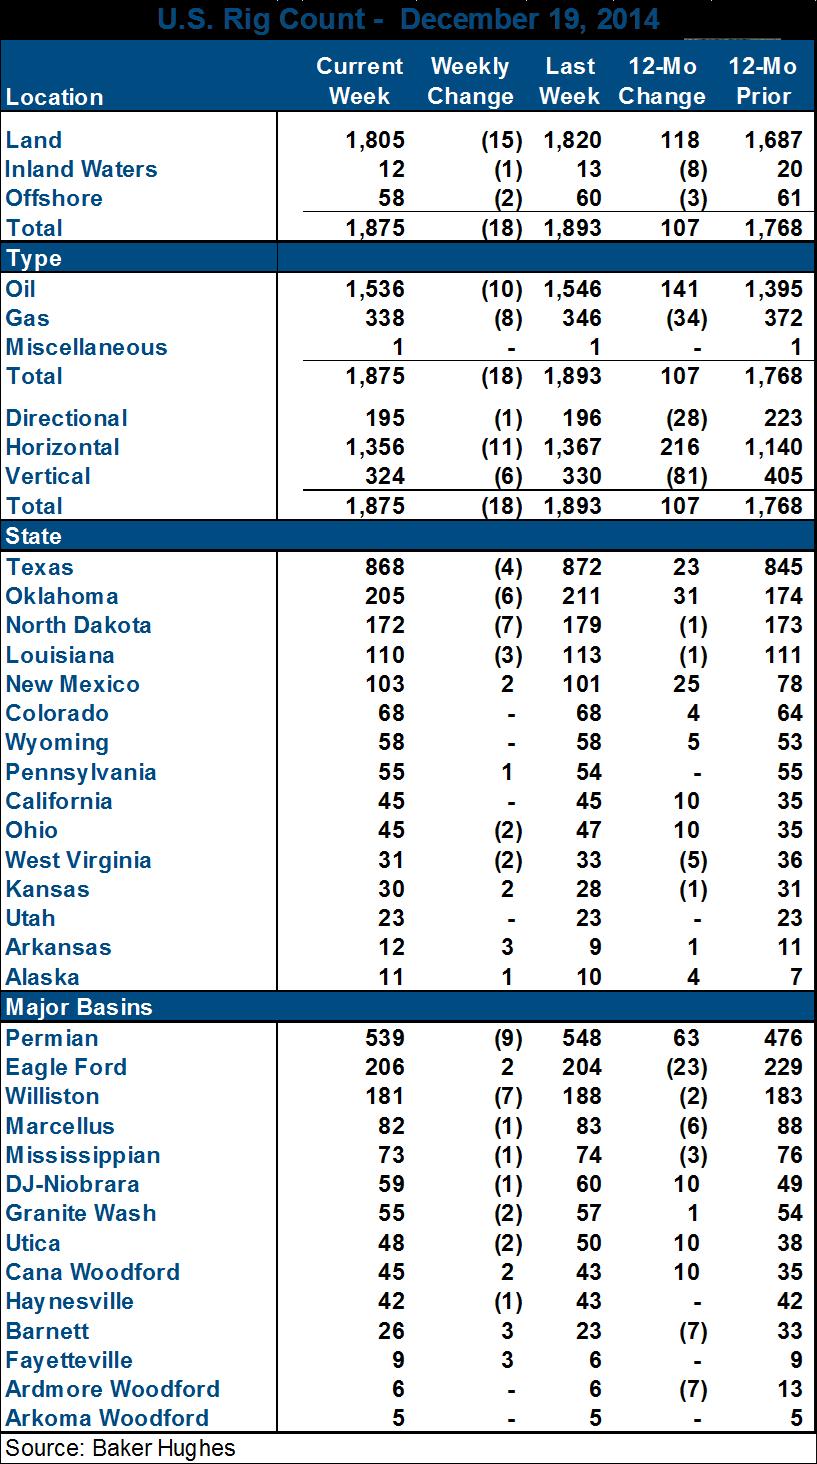 Week-over-week, Oil rigs were down by 10 to 1,536 rigs, while the Gas rig count was down by eight.